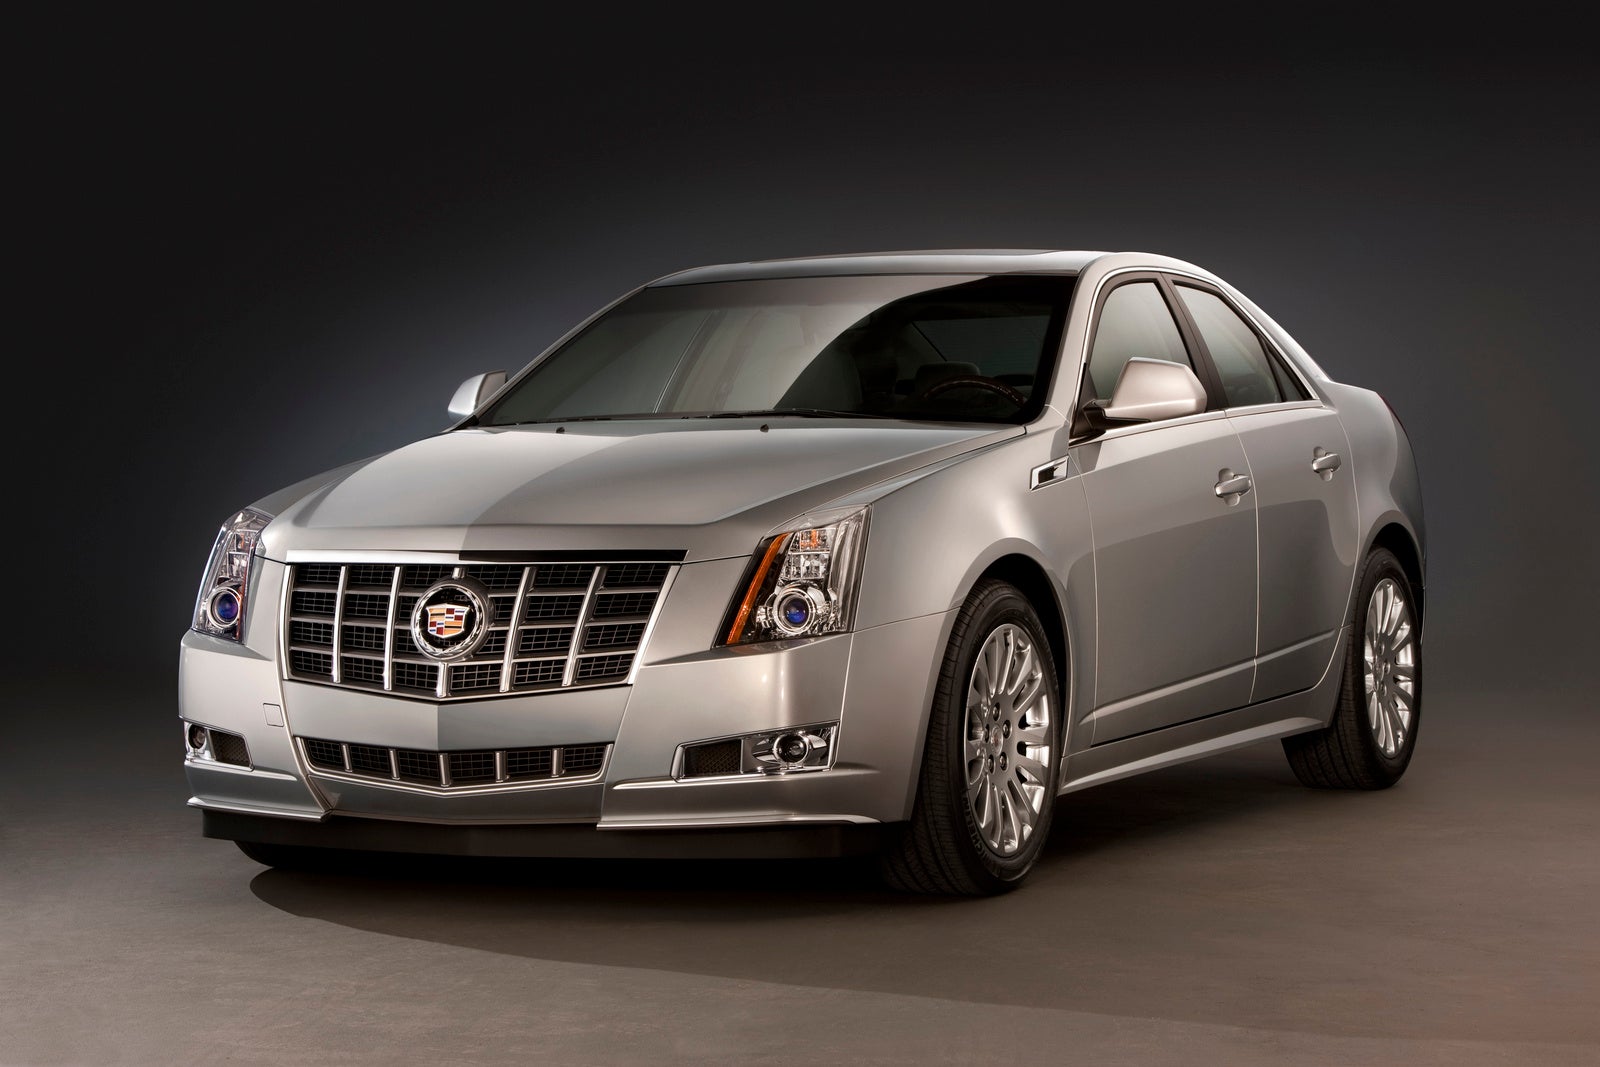 2013 Cadillac CTS  Review  CarGurus